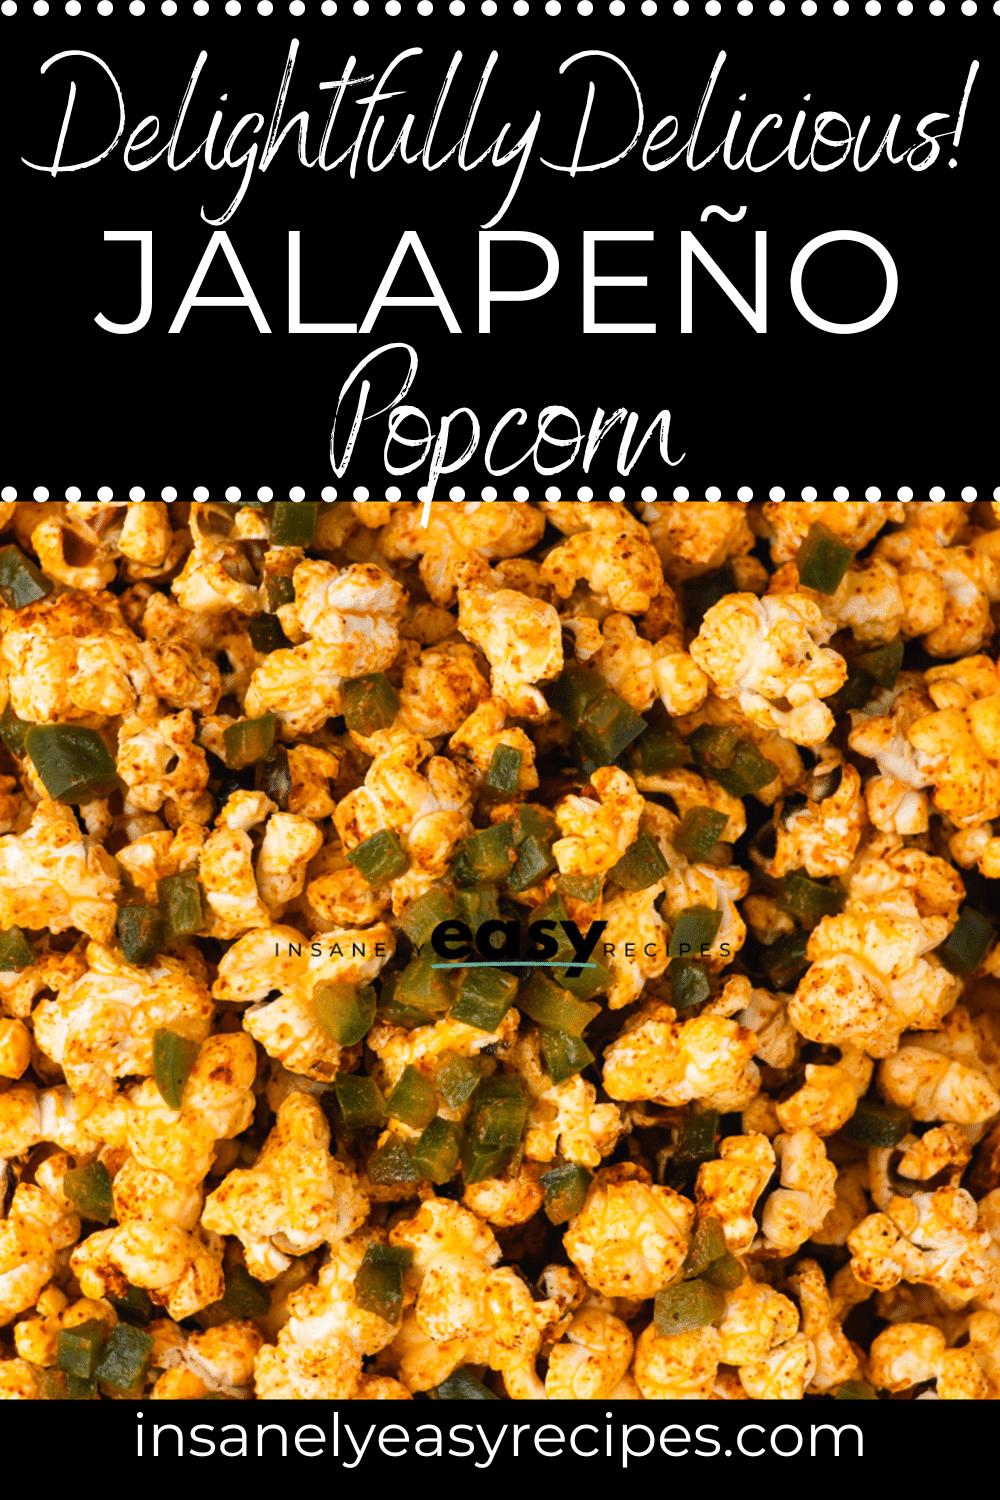 Popcorn with jalapenos mixed in. Text at top of image says "delightfully Delicious Jalapeno Popcorn"